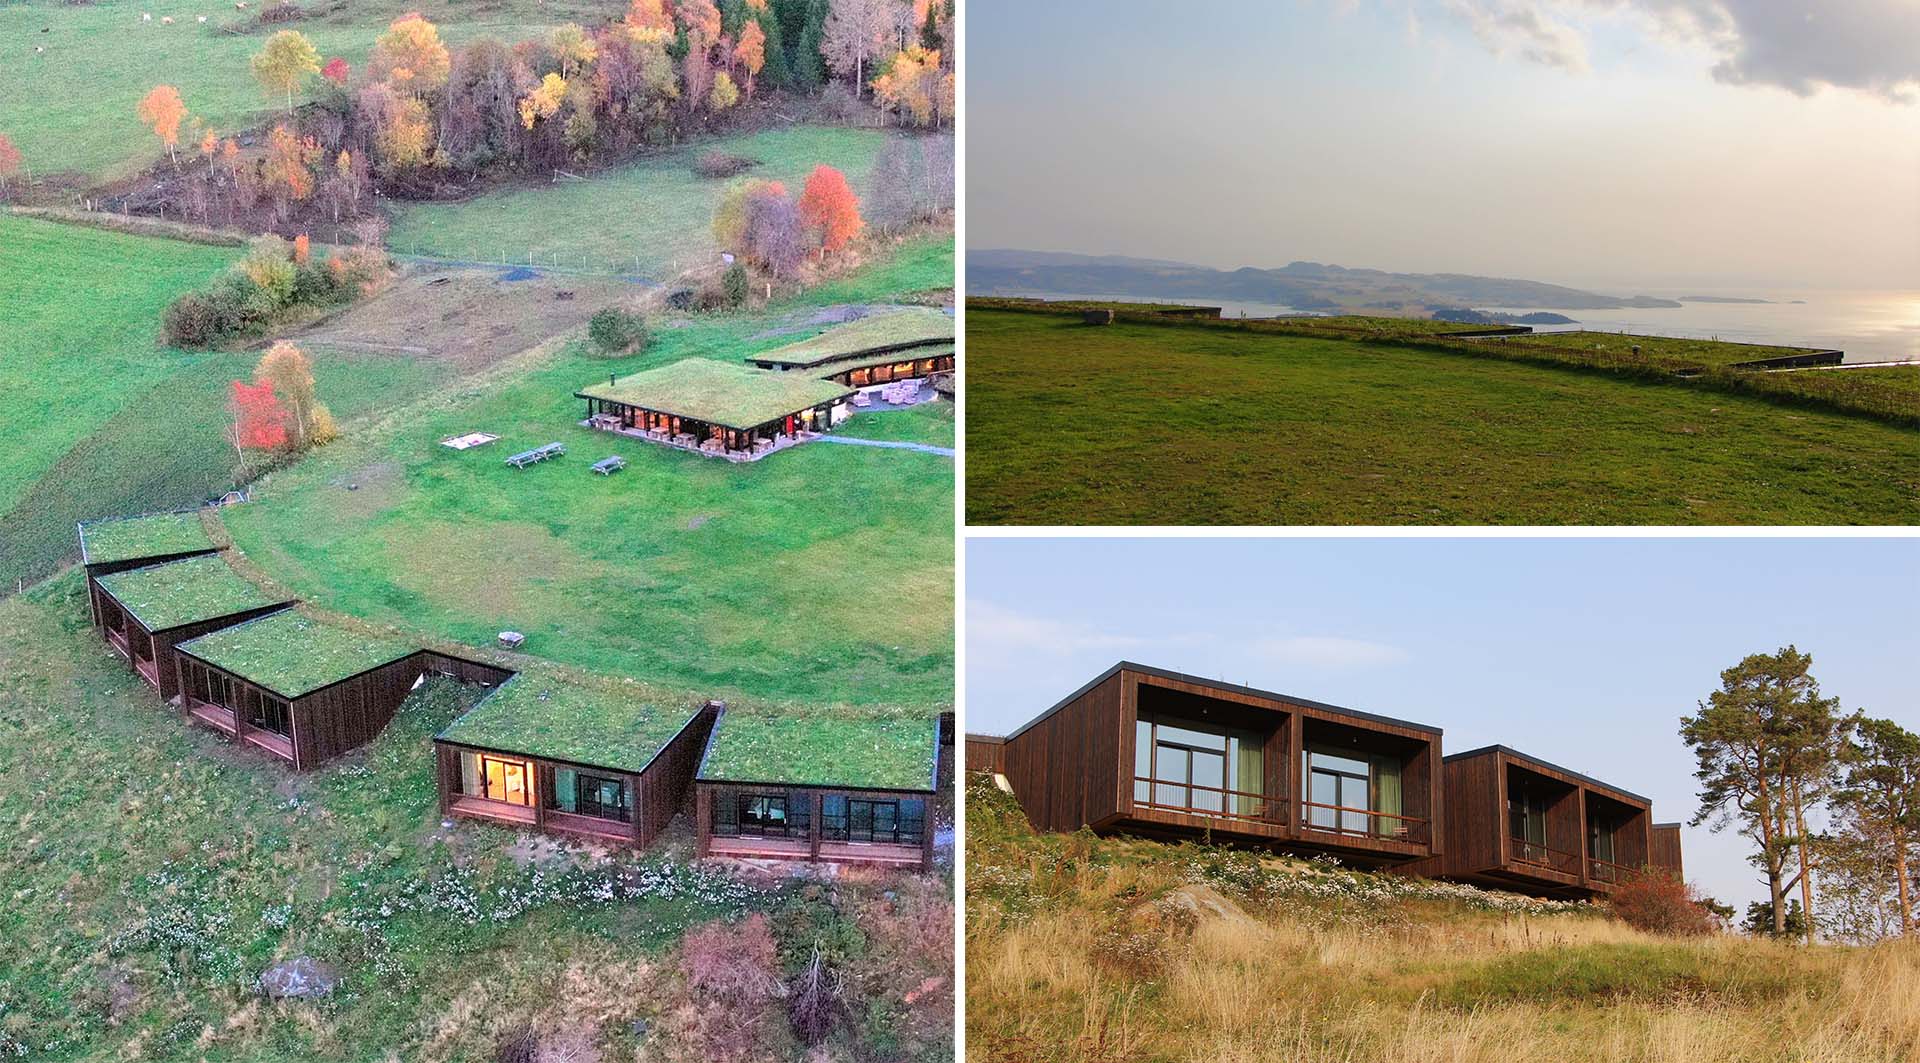 The Onya Cultural Landscape Hotel has rooms that blend into the hillside.